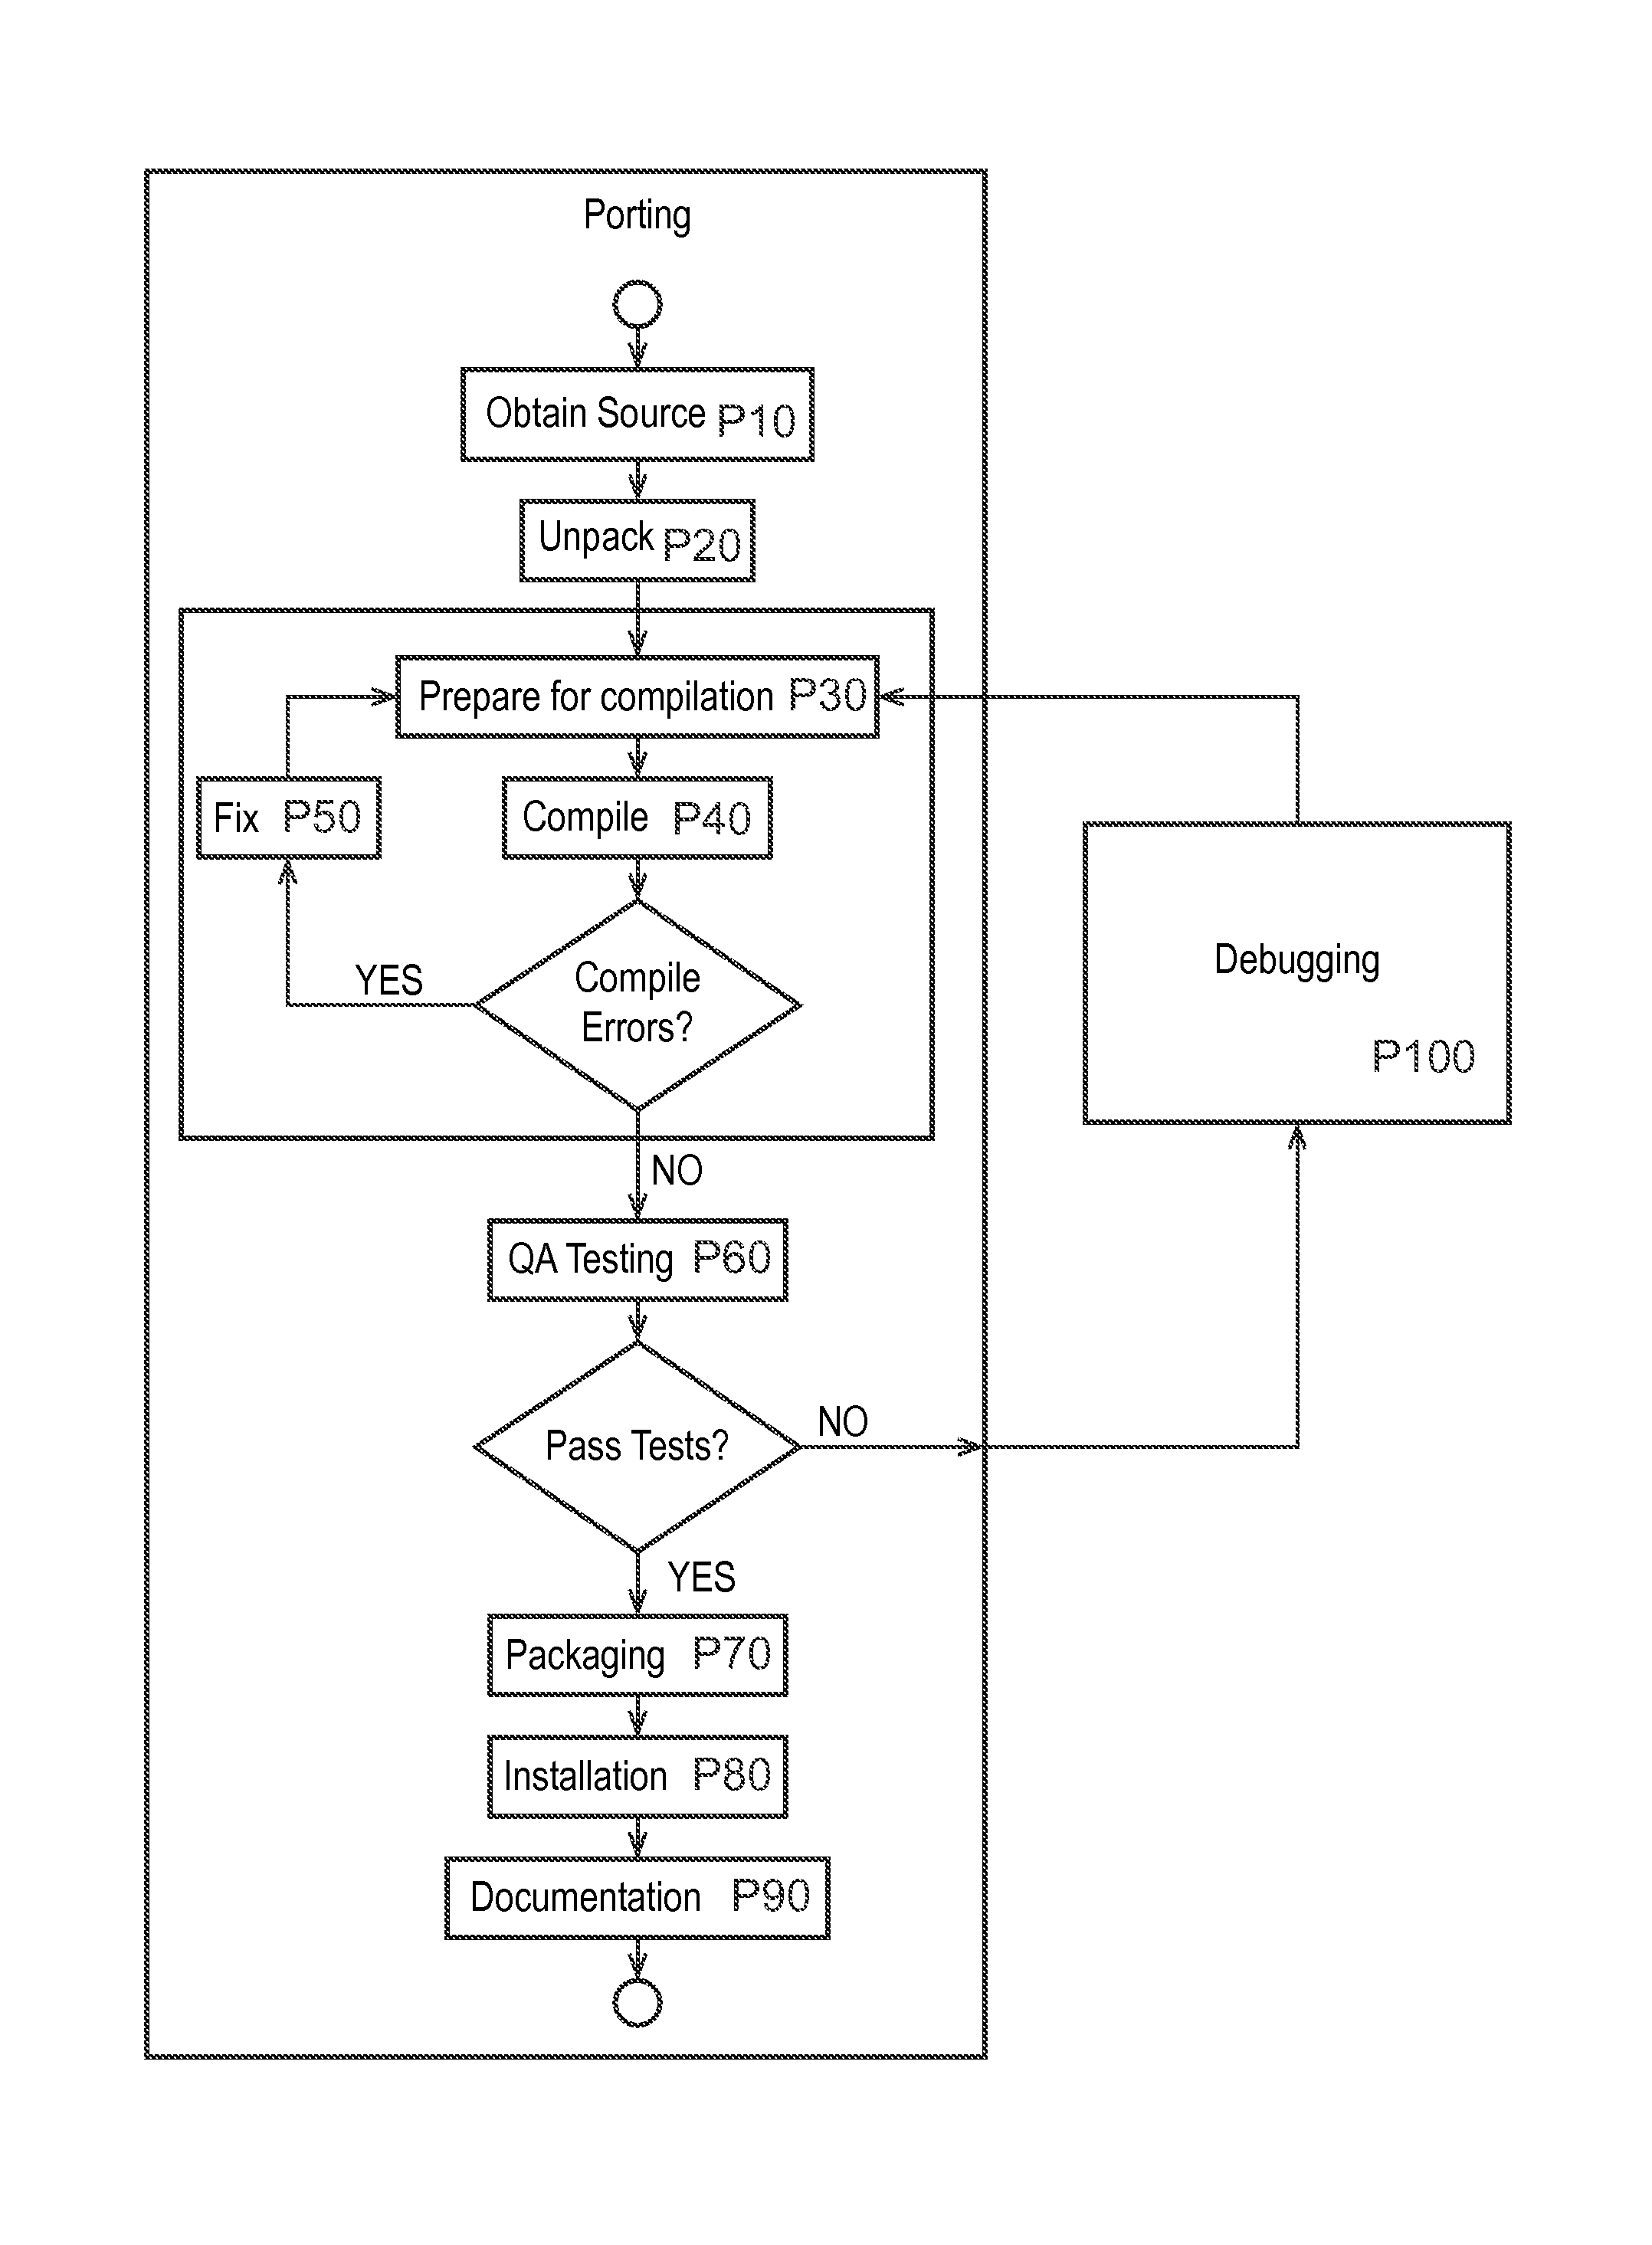 Method and apparatus for porting source code